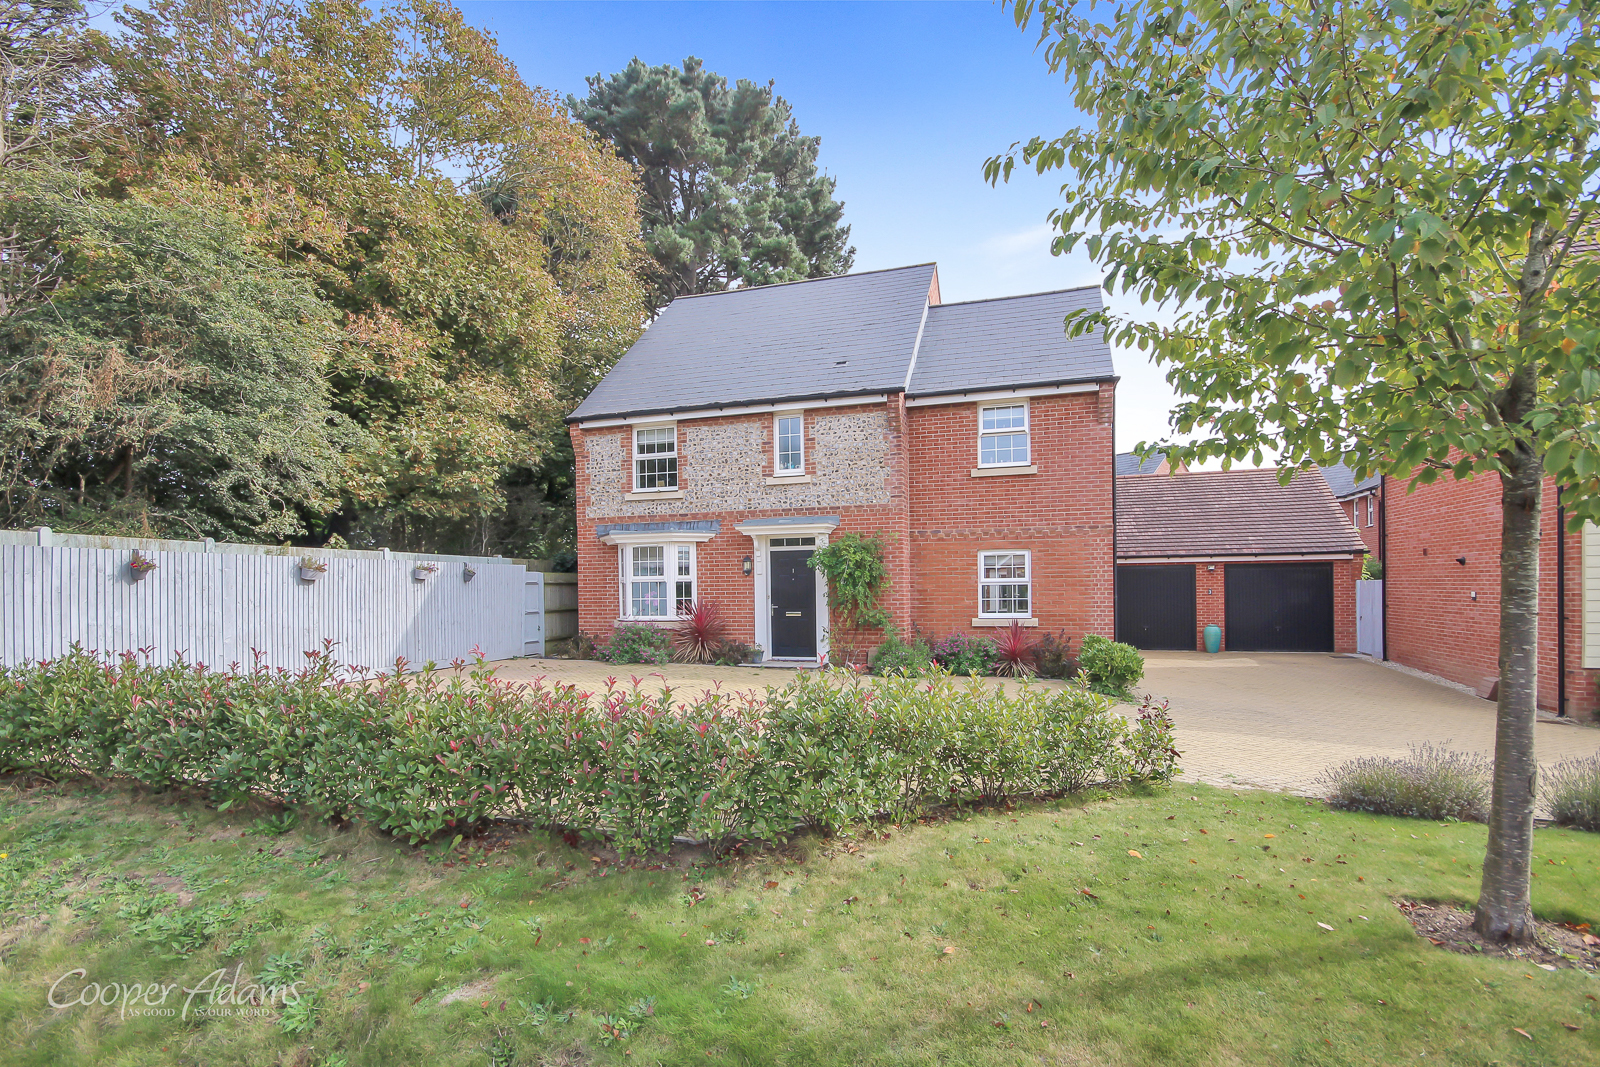 4 bed house for sale in Alexander Avenue, Angmering - Property Image 1